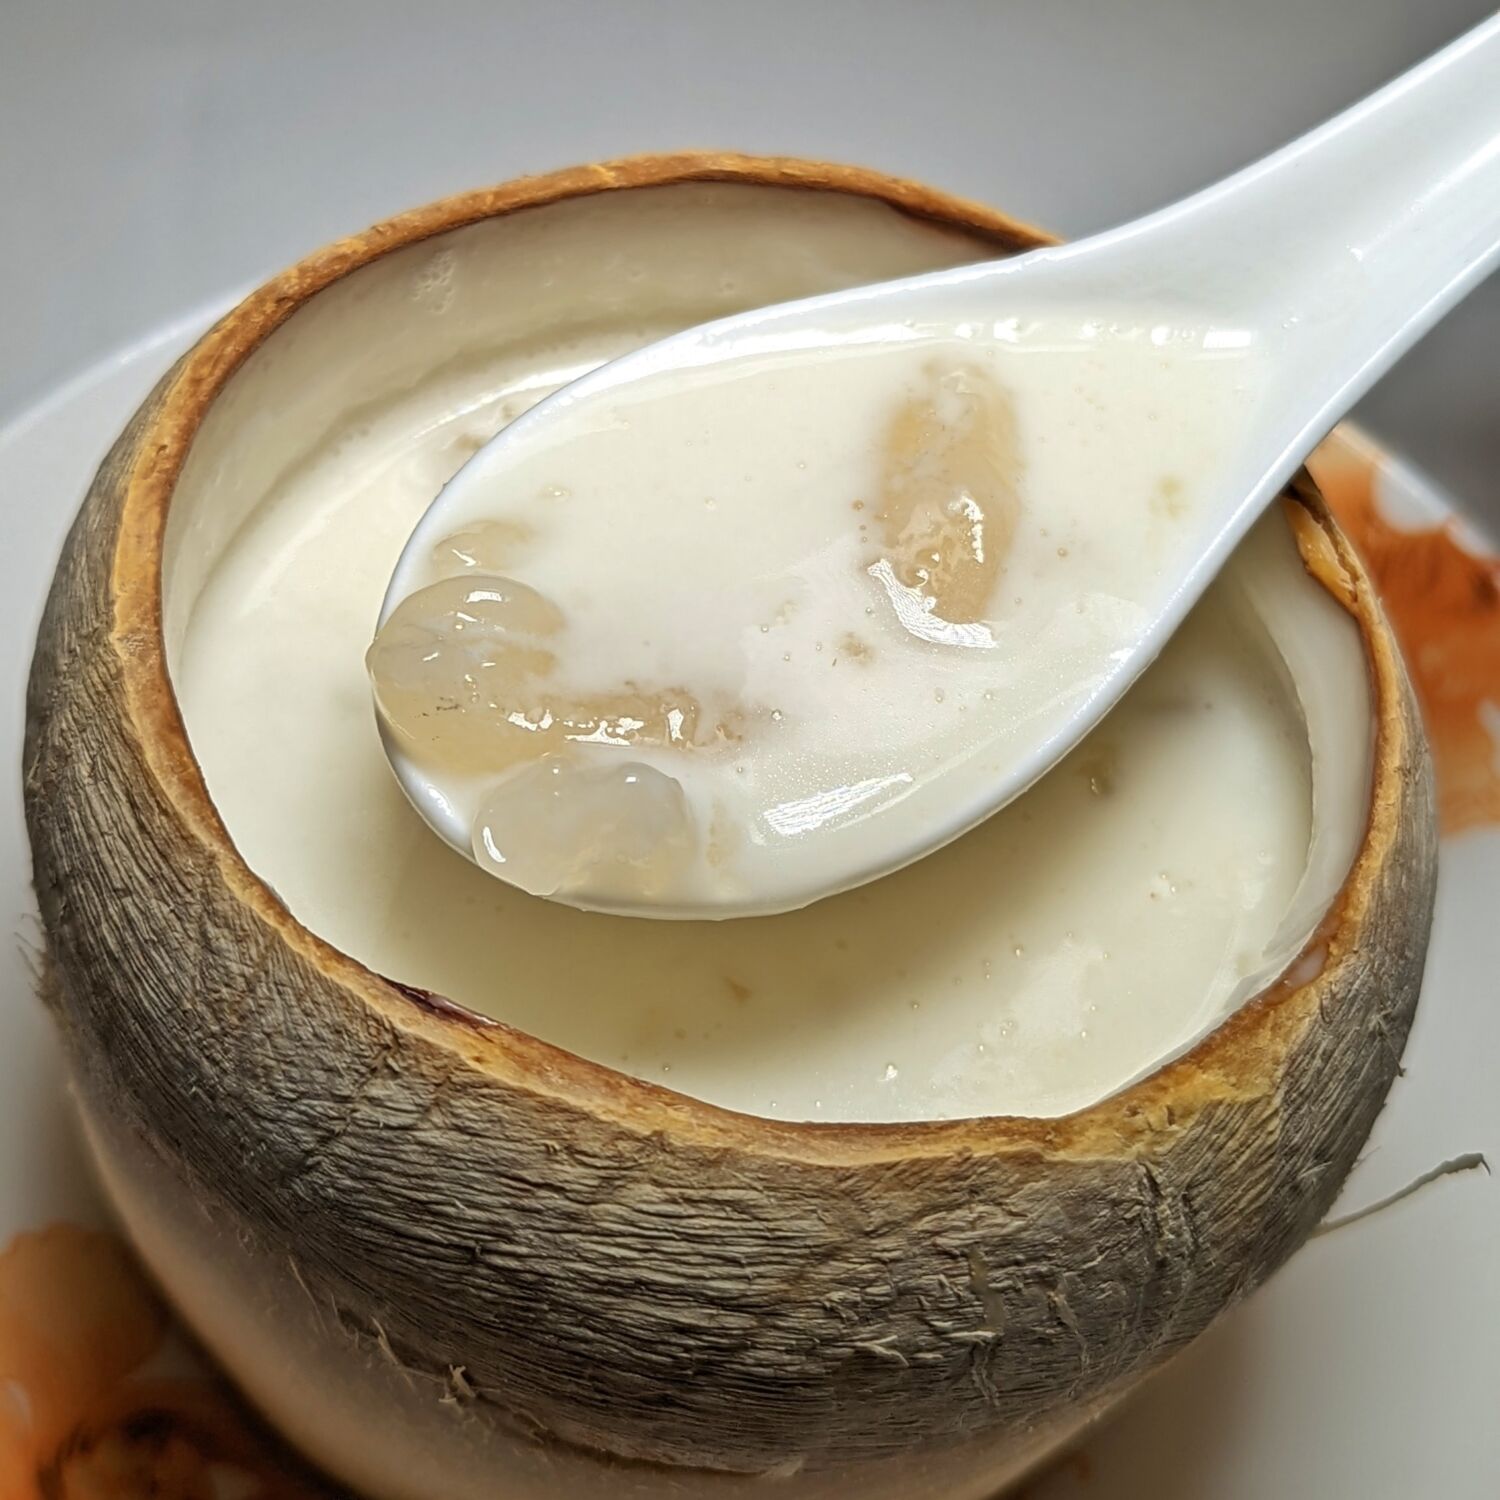 Regent Singapore Summer Palace Double-boiled Hasma with Almond Cream served in Young Coconut